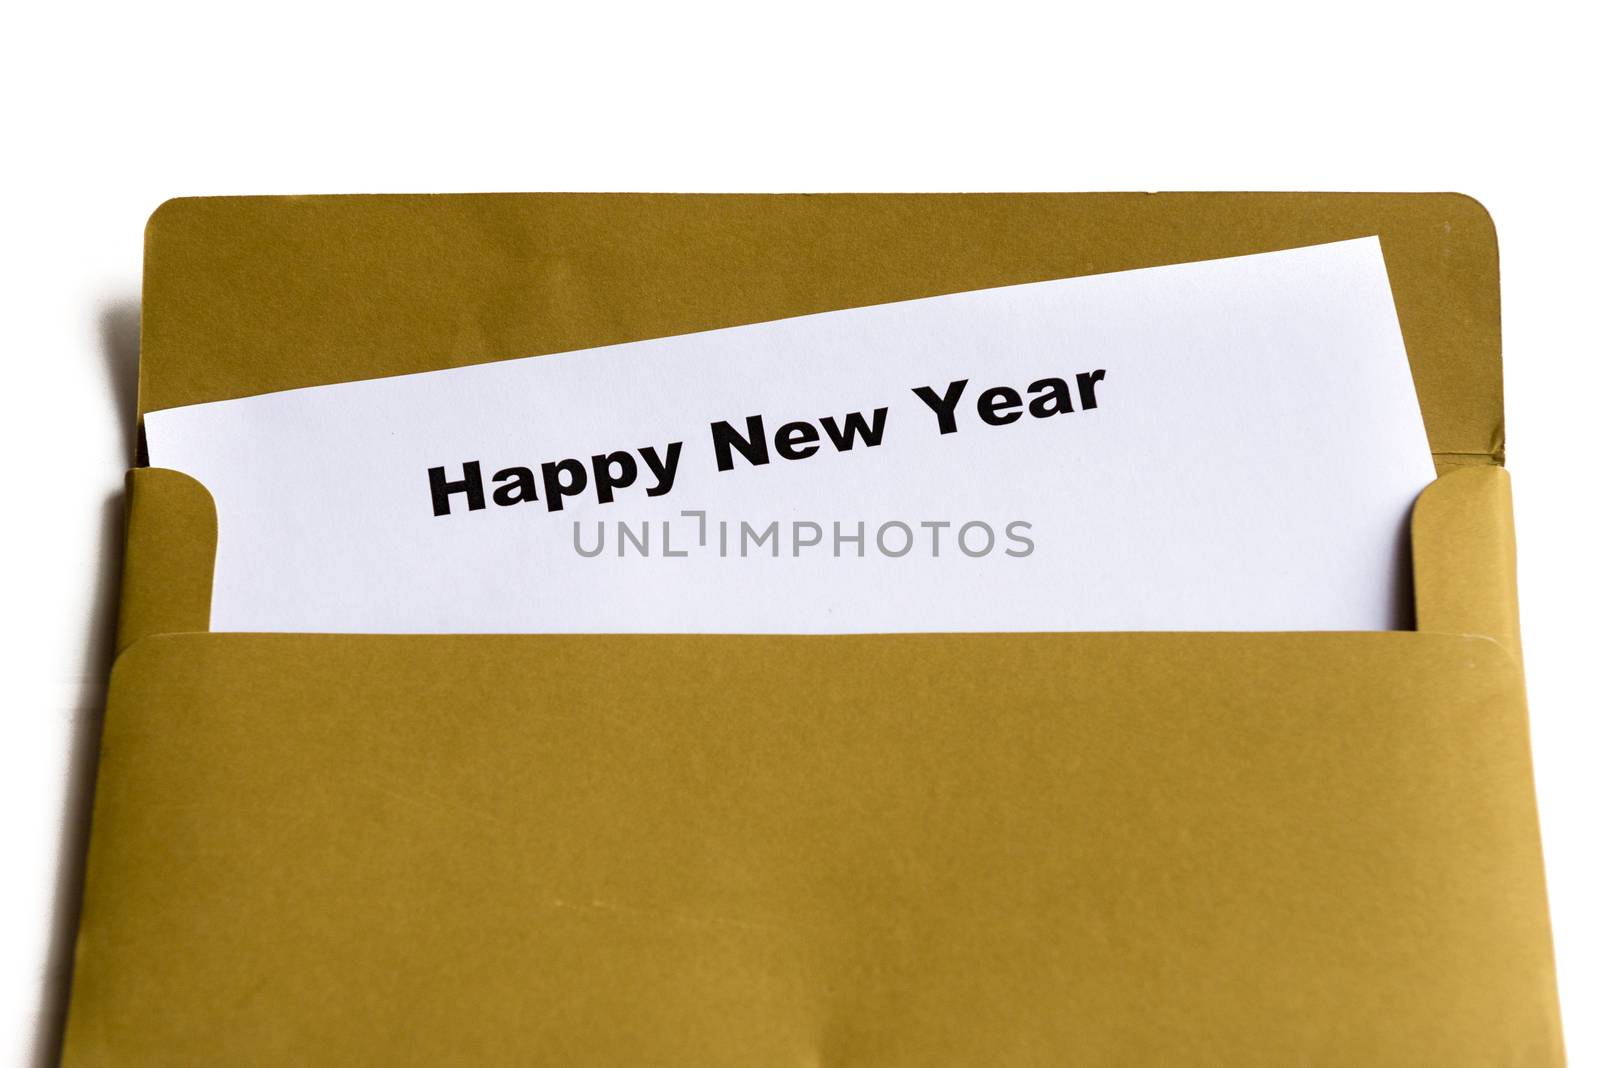 happy new year words in the envelope